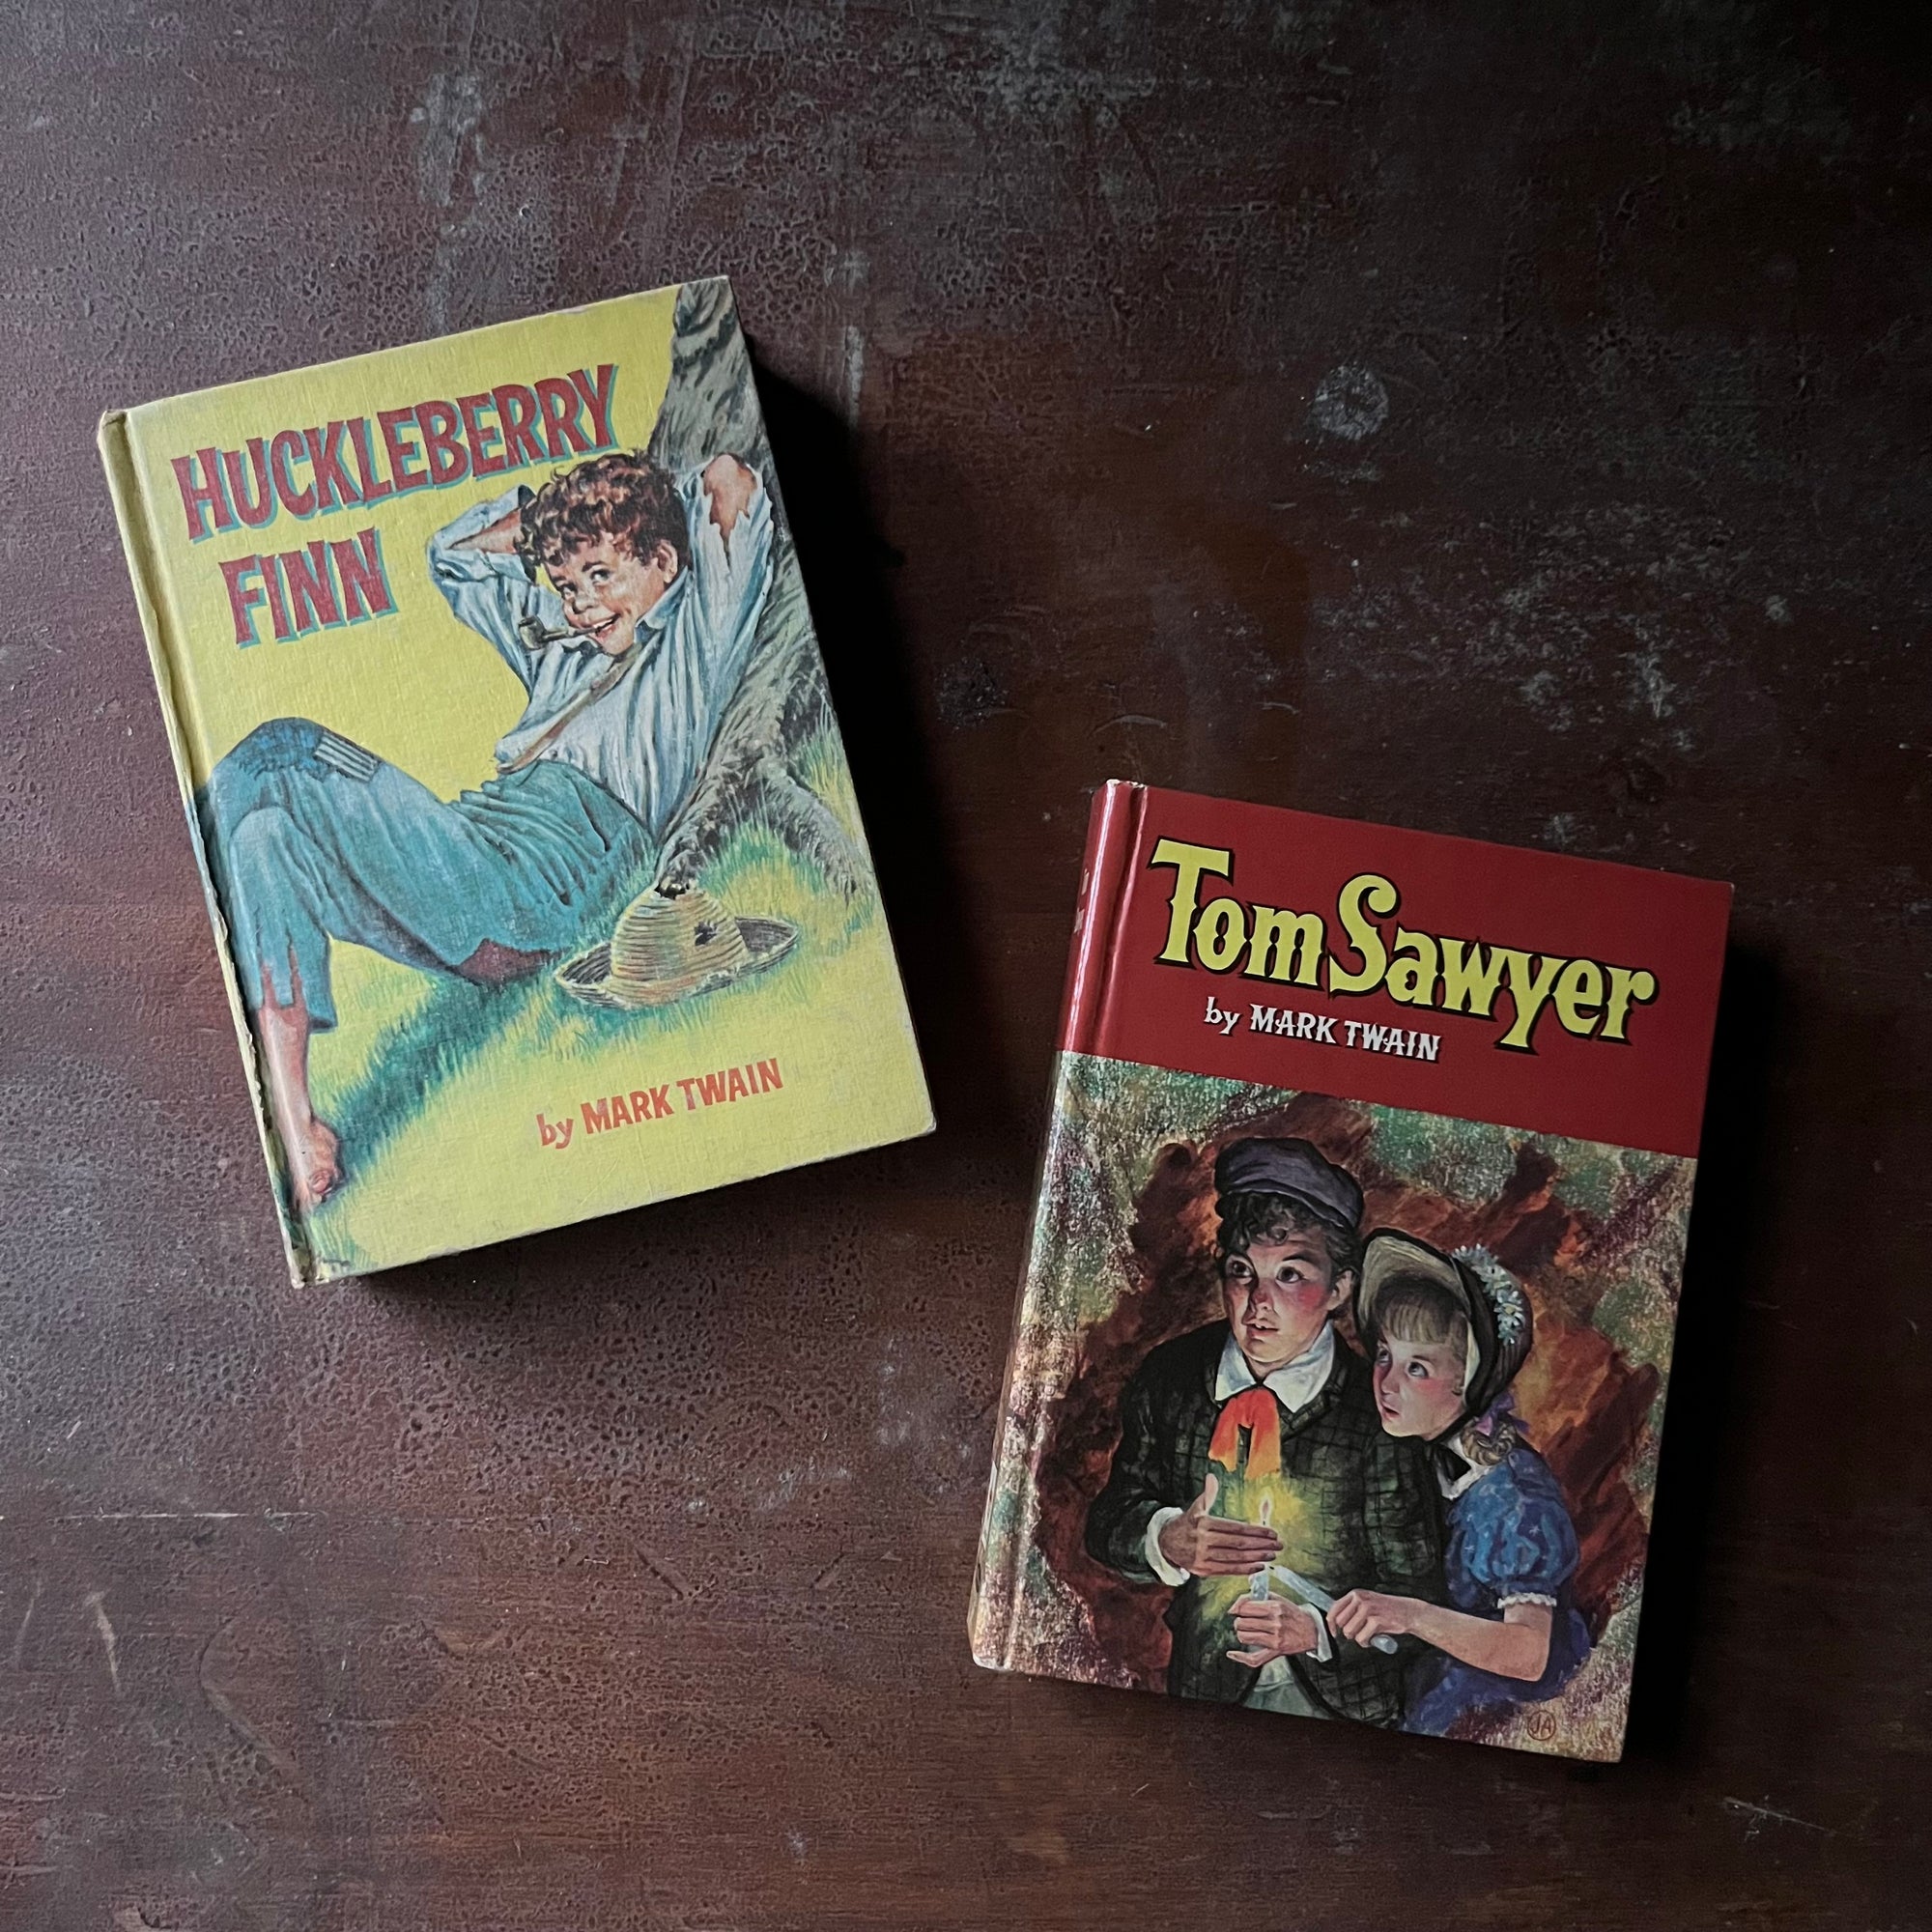 vintage children's chapter books, banned books - Whitman Classics Huckleyberry Finn & Tom Sawyer written by Mark Twain with illustrations by Cart & Paul Frame - view of the front covers